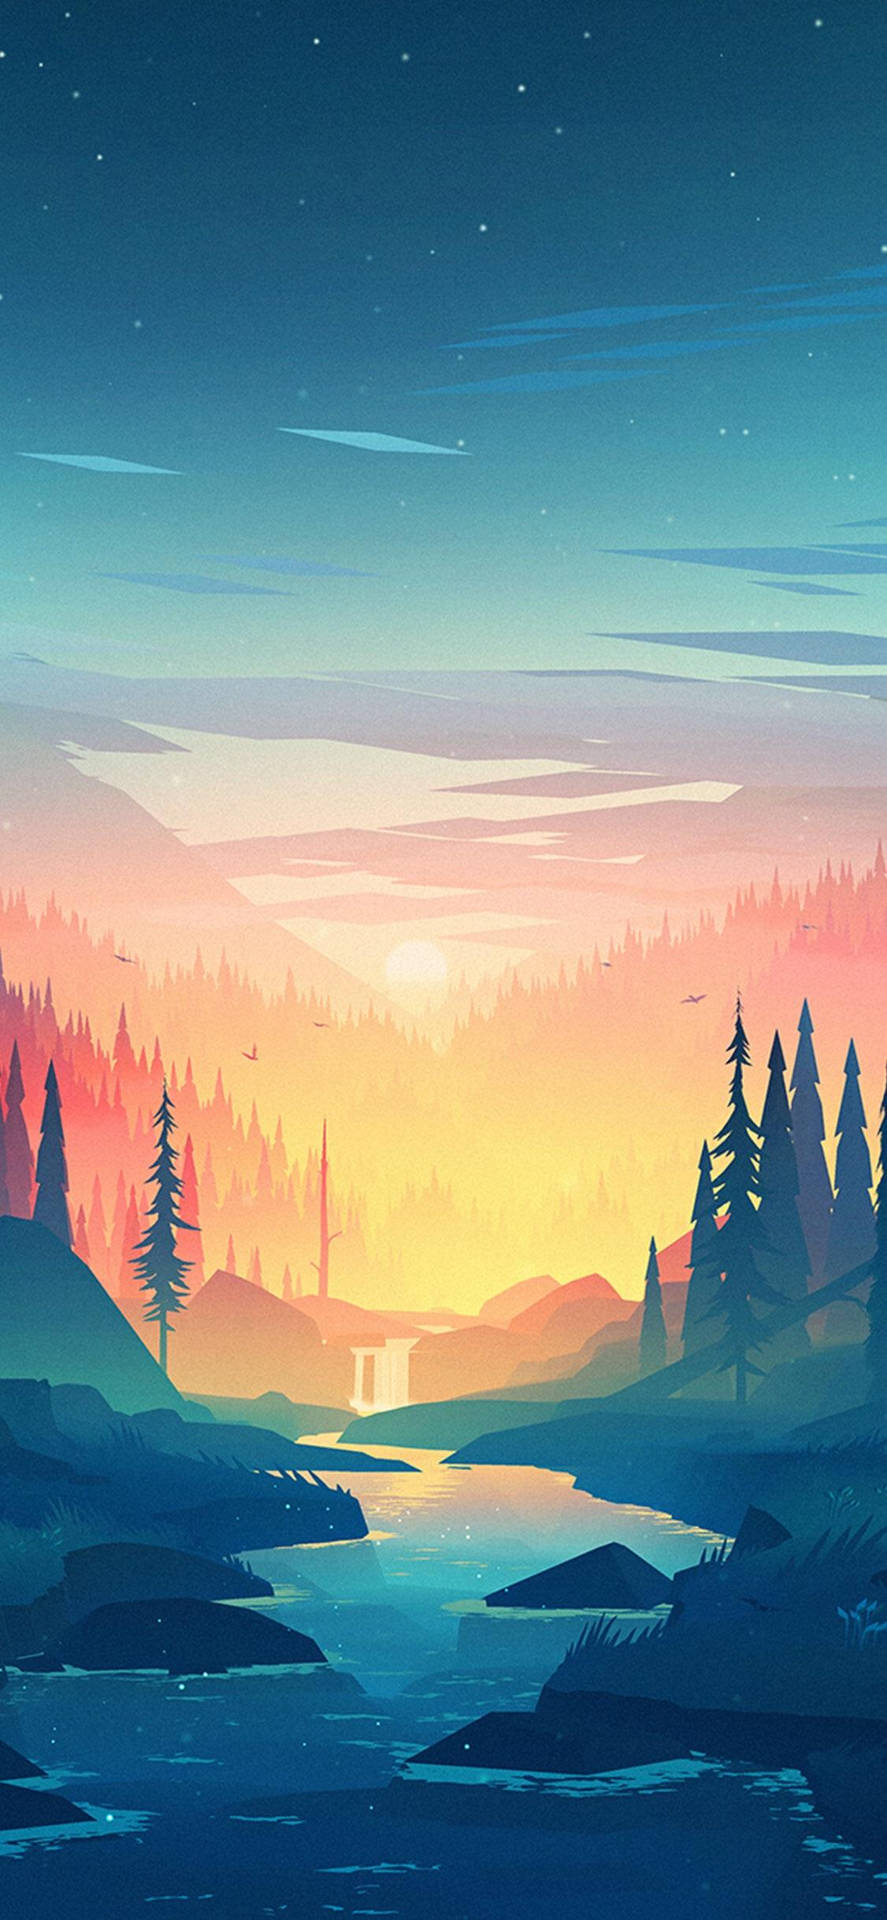 Iphone X Wallpaper Images